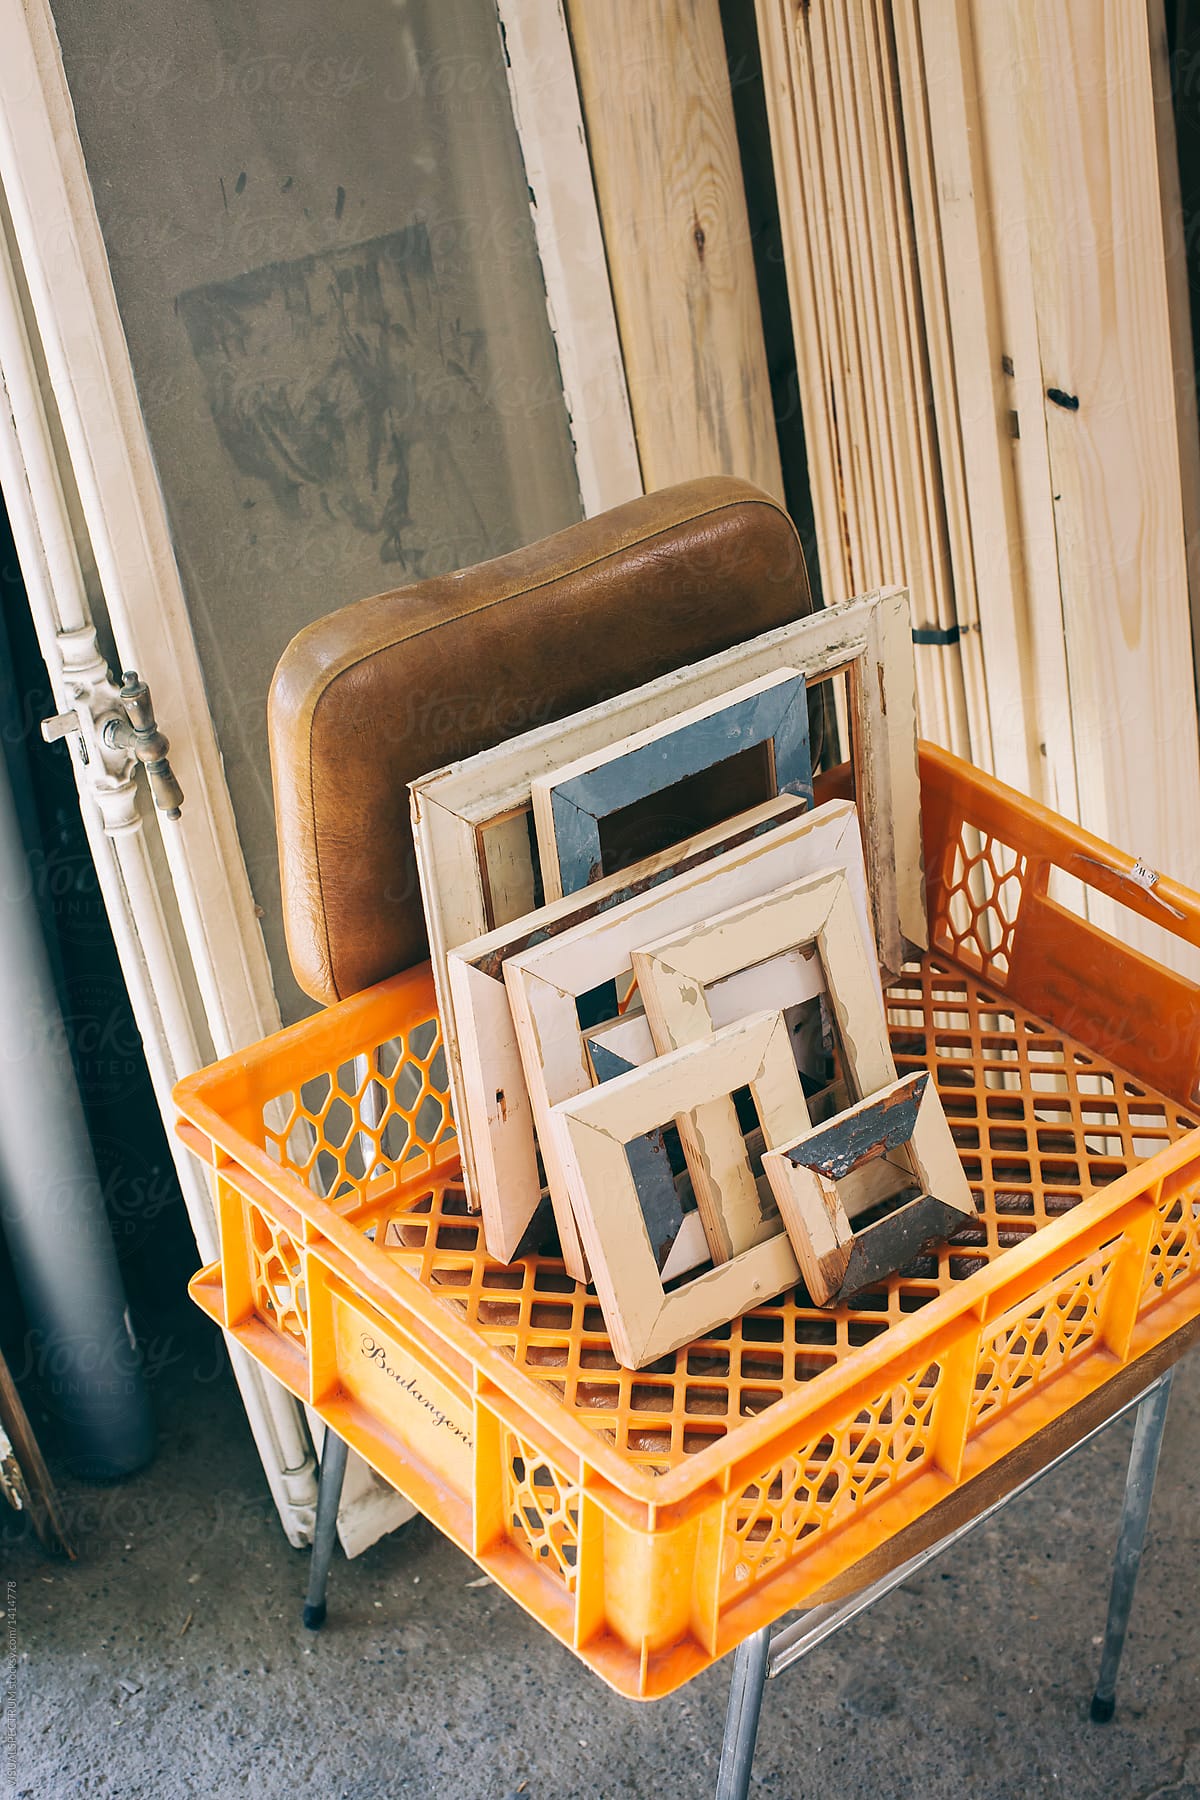 Wooden Picture Frames Made of Reclaimed Wood Standing in Orange Plastic Crate